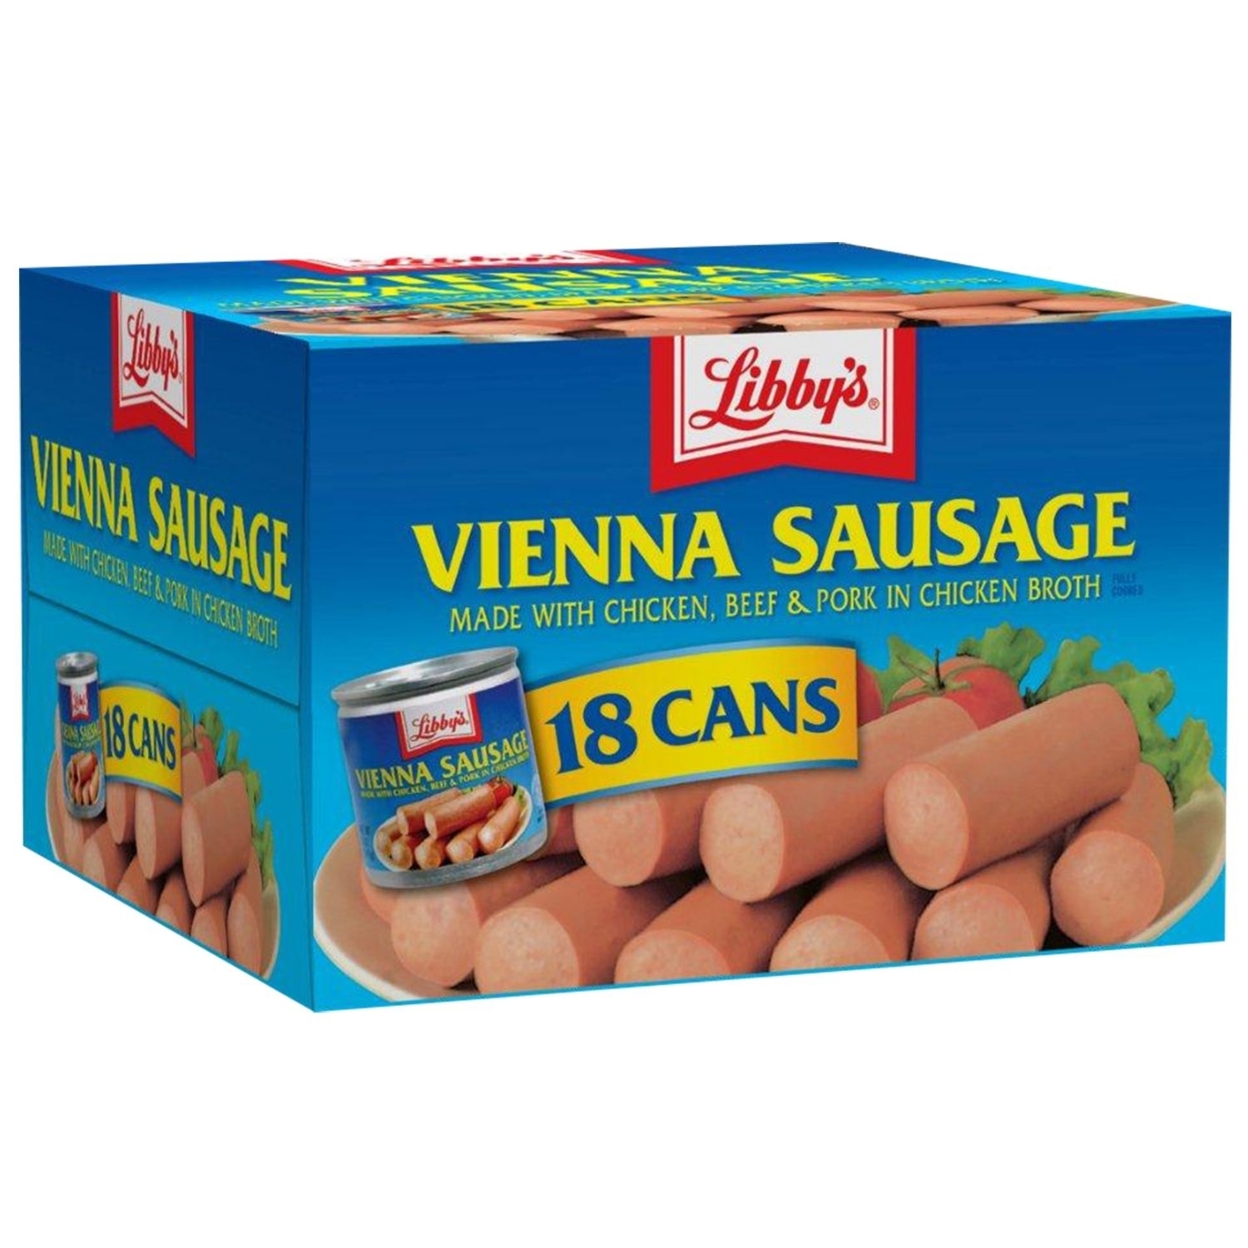 Libby's Vienna Sausage - 4.6 Ounce Cans - 18 Pack